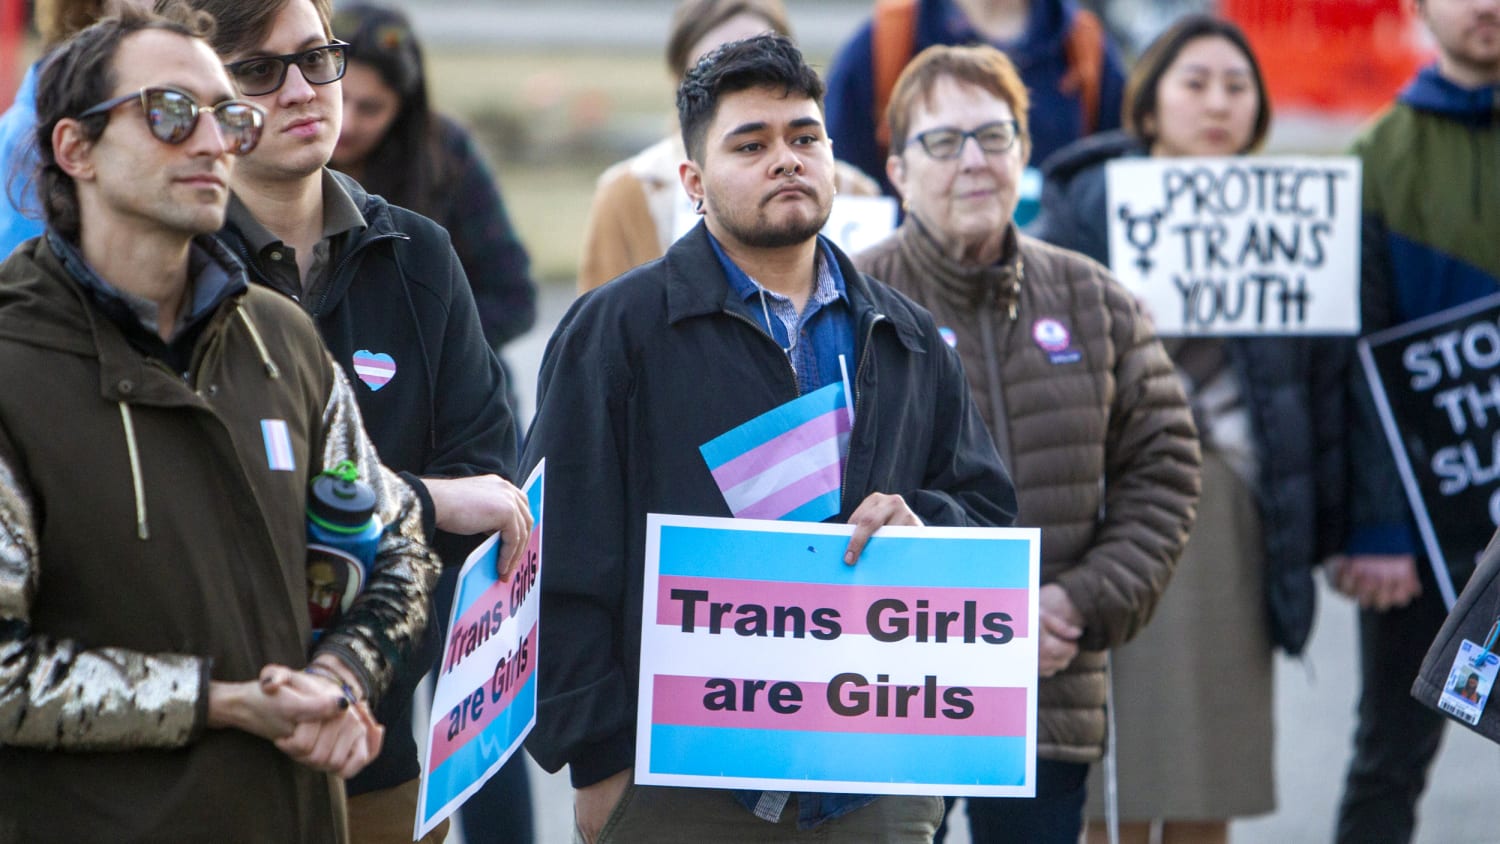 New U.S. state laws directed at transgender youth